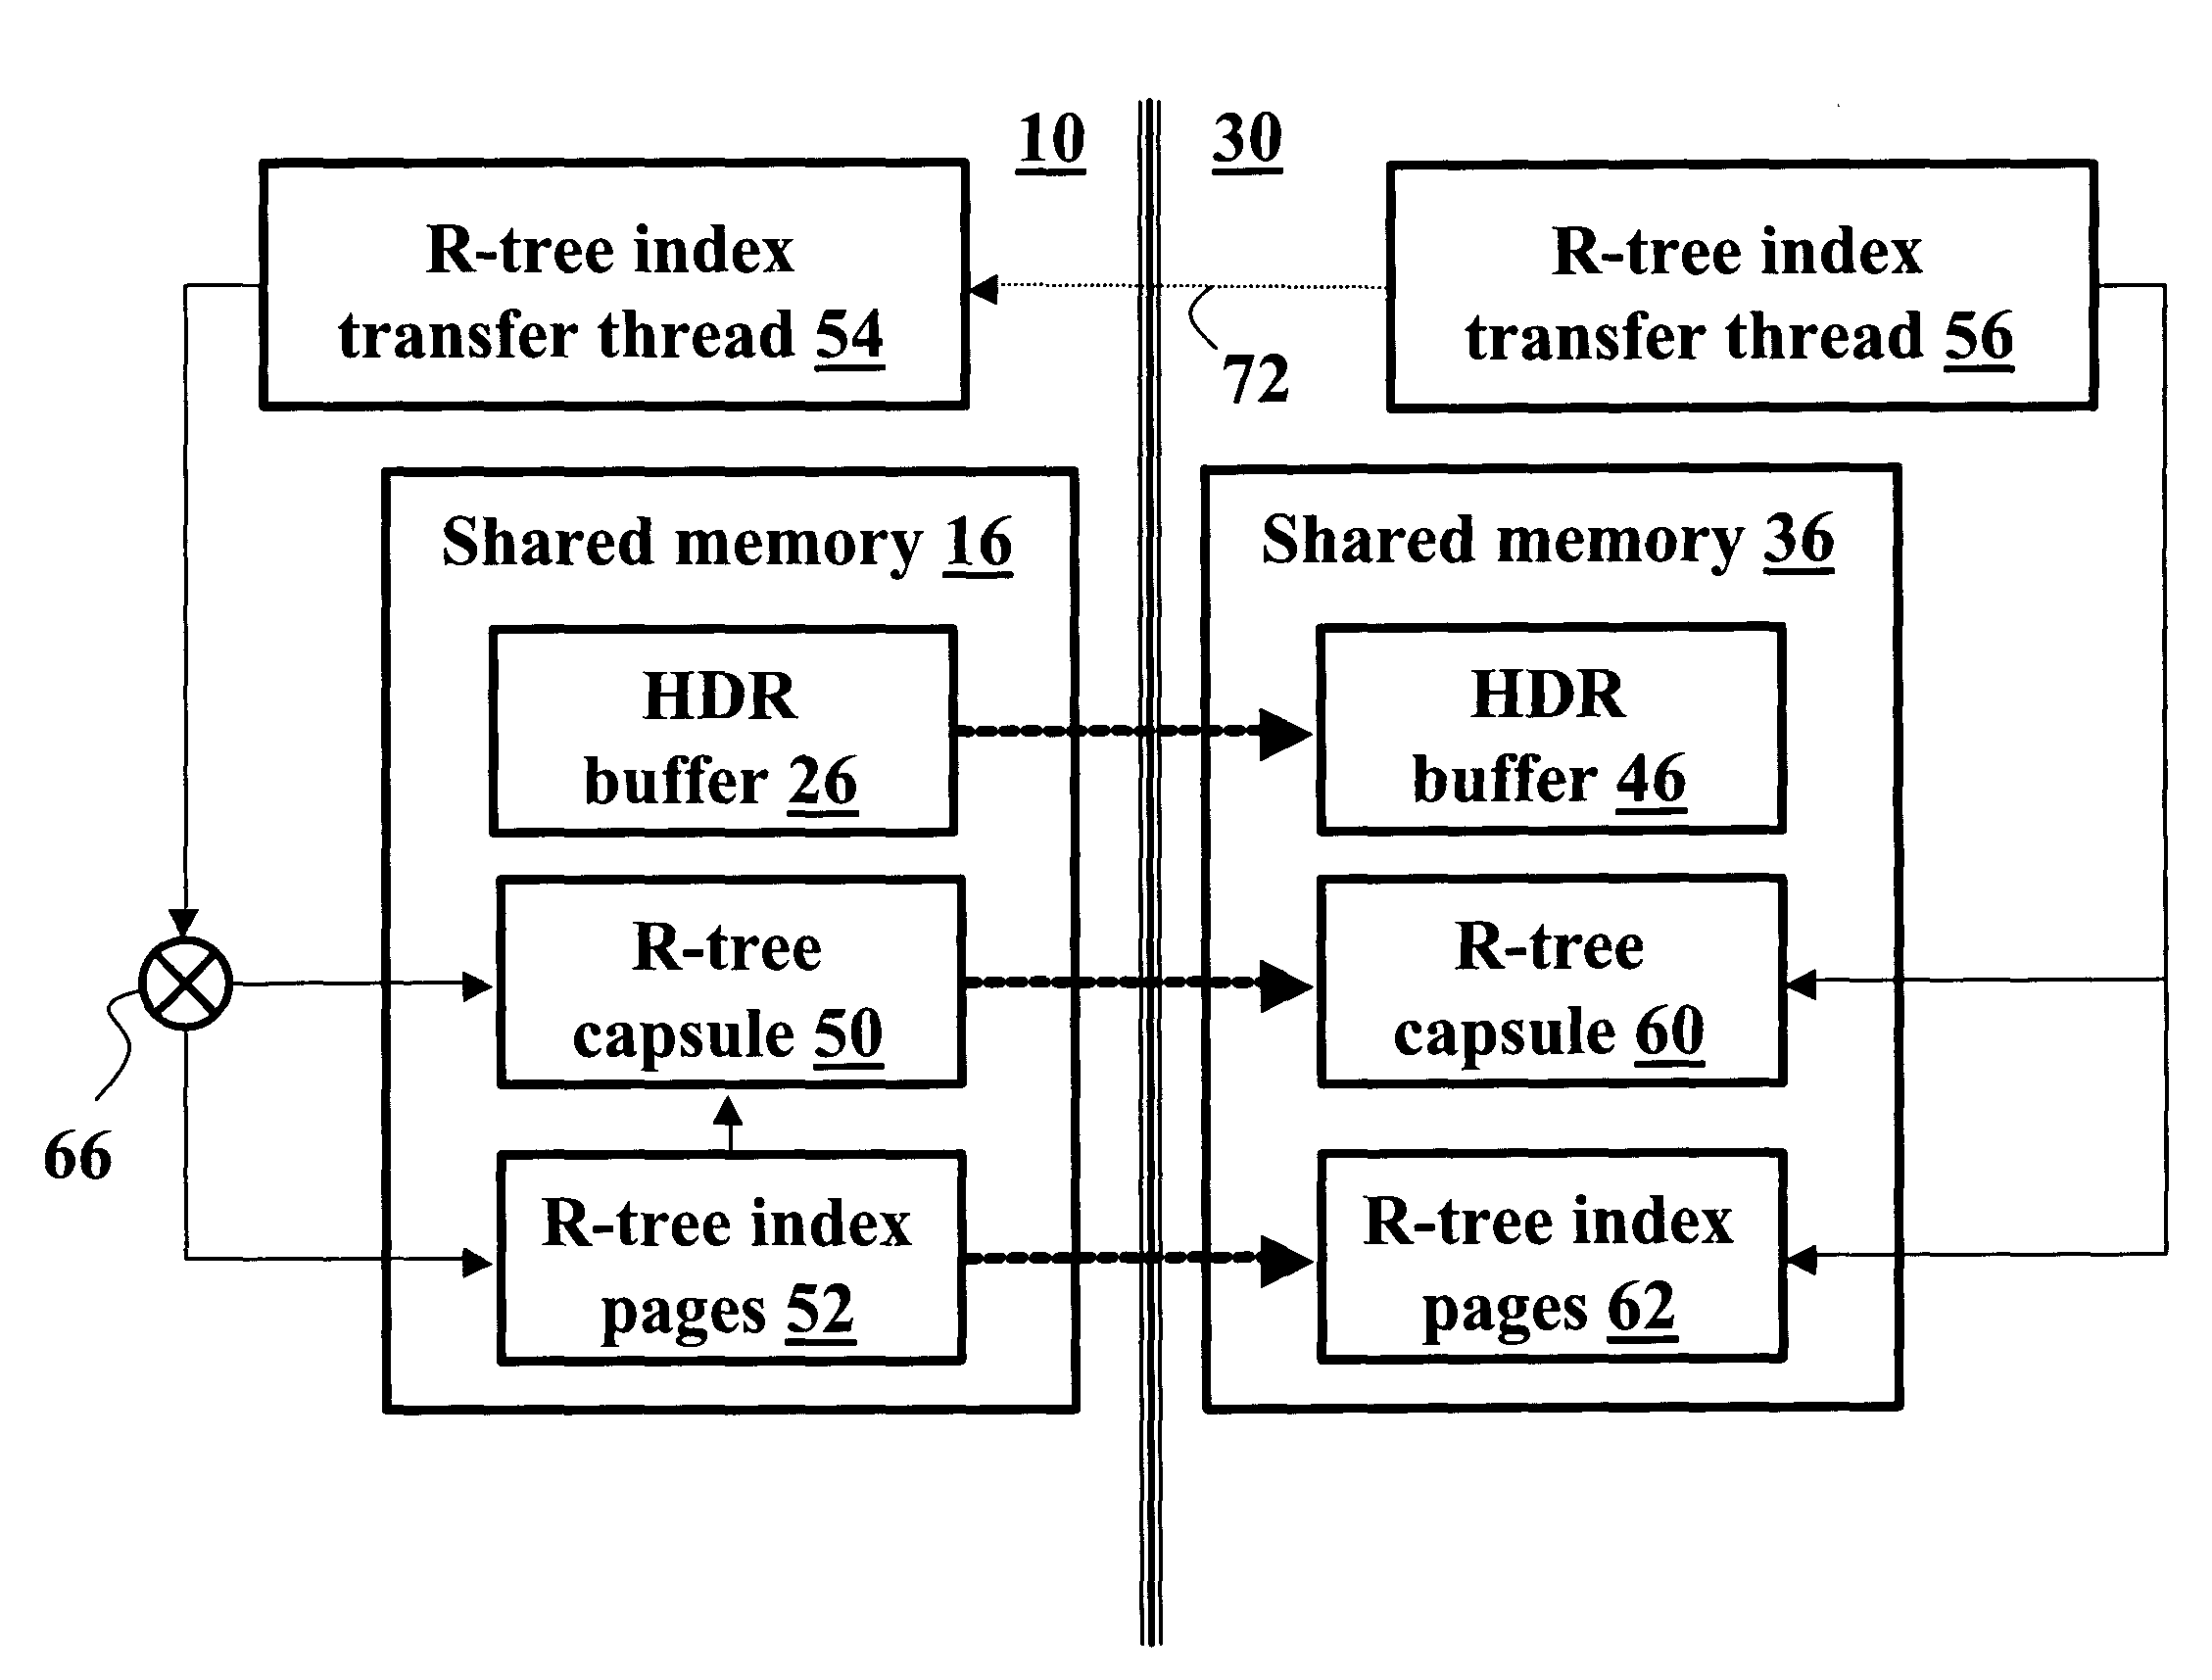 Database backup system using data and user-defined routines replicators for maintaining a copy of database on a secondary server